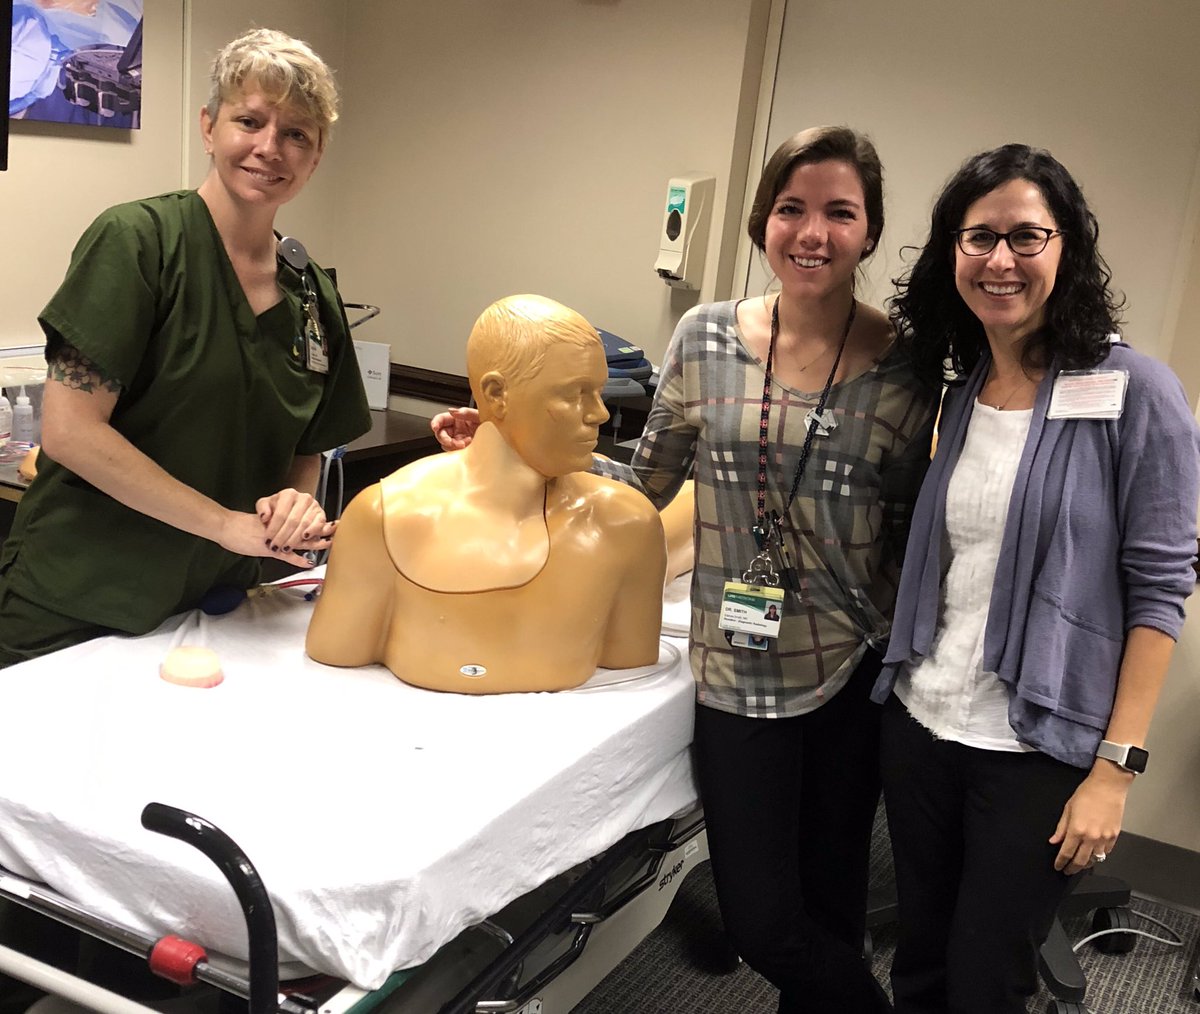 Got a great tour of the UAB Sim Center this morning learning about ways to bring more simulation & coaching to @uabRadResidents 👏🏻 Lots of exciting new things in the works! #radresidents #radiologyeducation #coaching